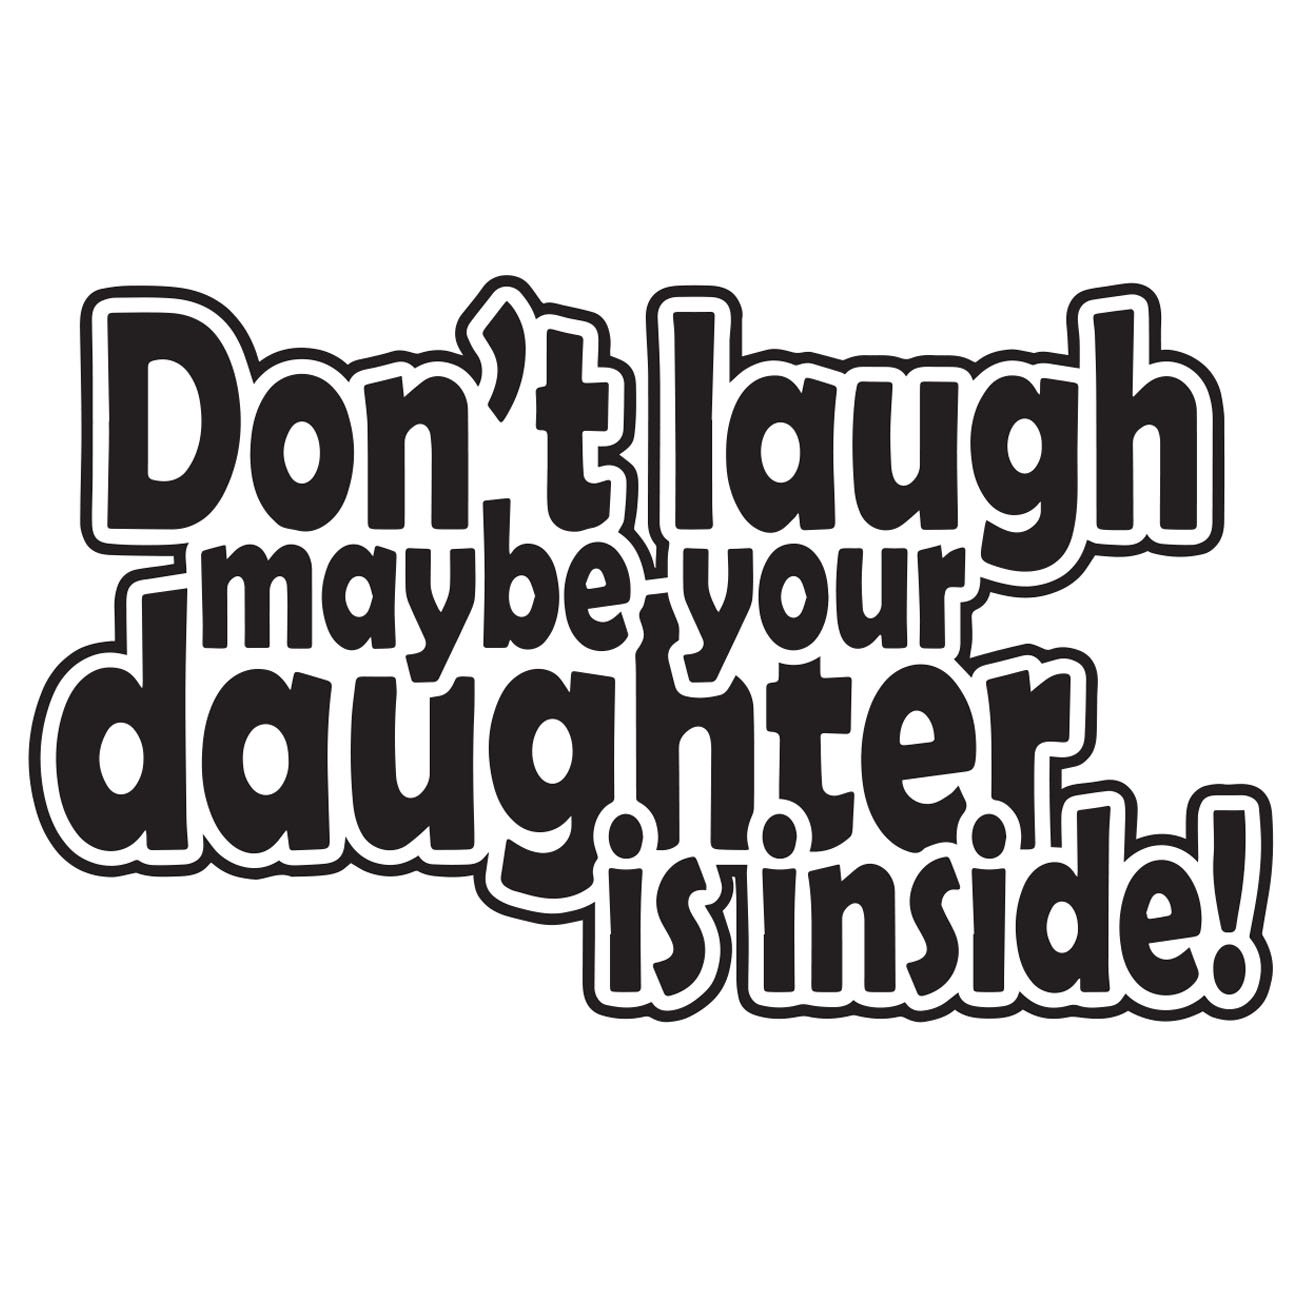 Dont laugh maybe your daughter is inside